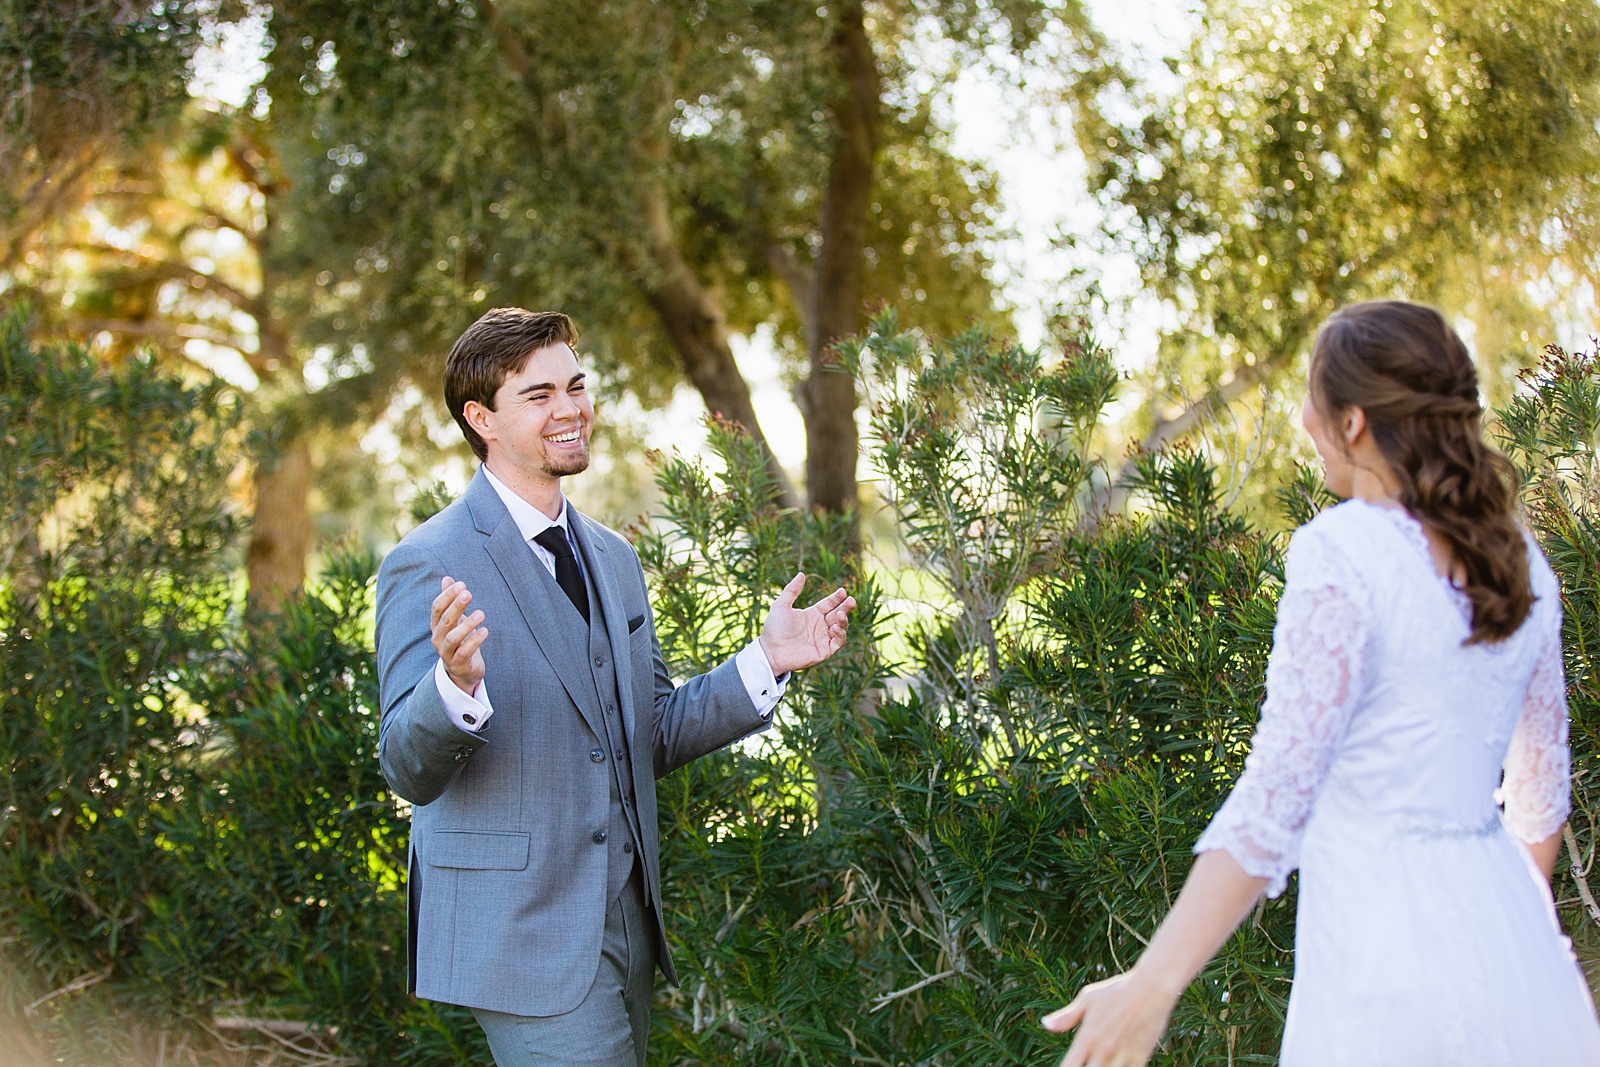 Bride and groom's first look at Ocotillo Oasis by Phoenix wedding photographer PMA Photography.